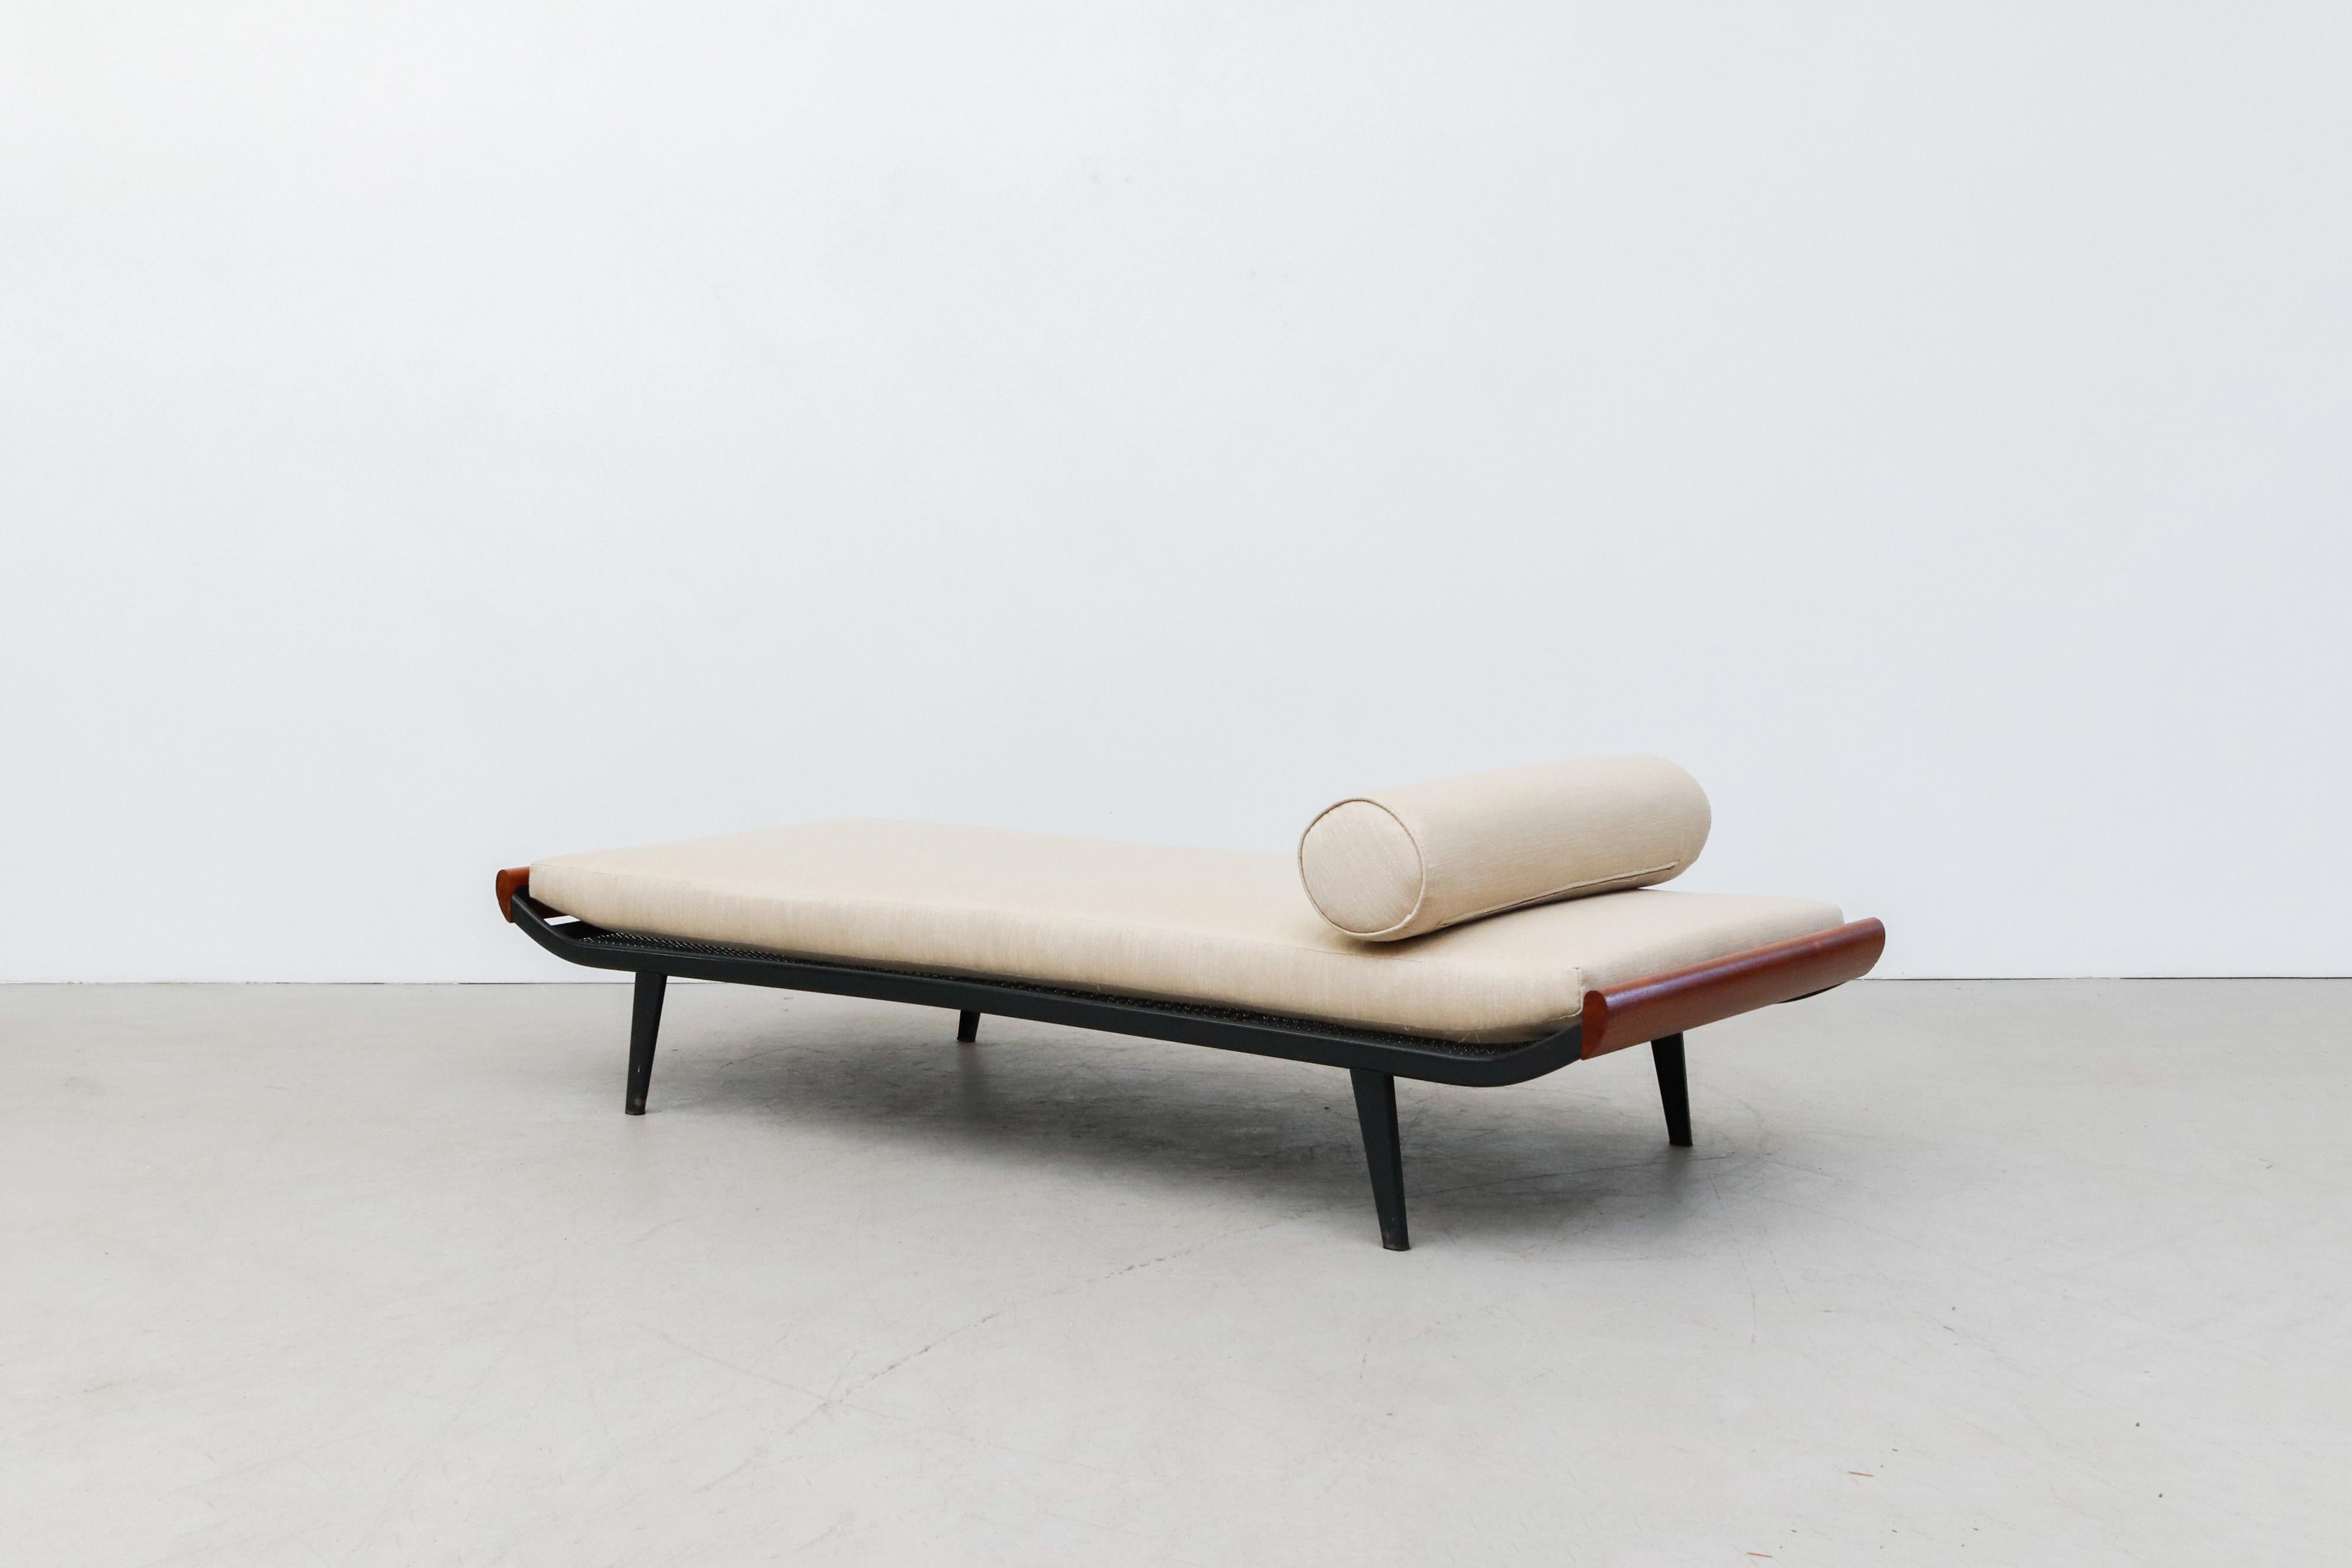 1960's Narrow 'Cleopatra' style daybed by A.R. Cordemeyer. New custom froth mattress on grey enameled metal frame with lightly refinished teak ends and matching bolster. Frame is in overall original condition with some visible wear consistent with